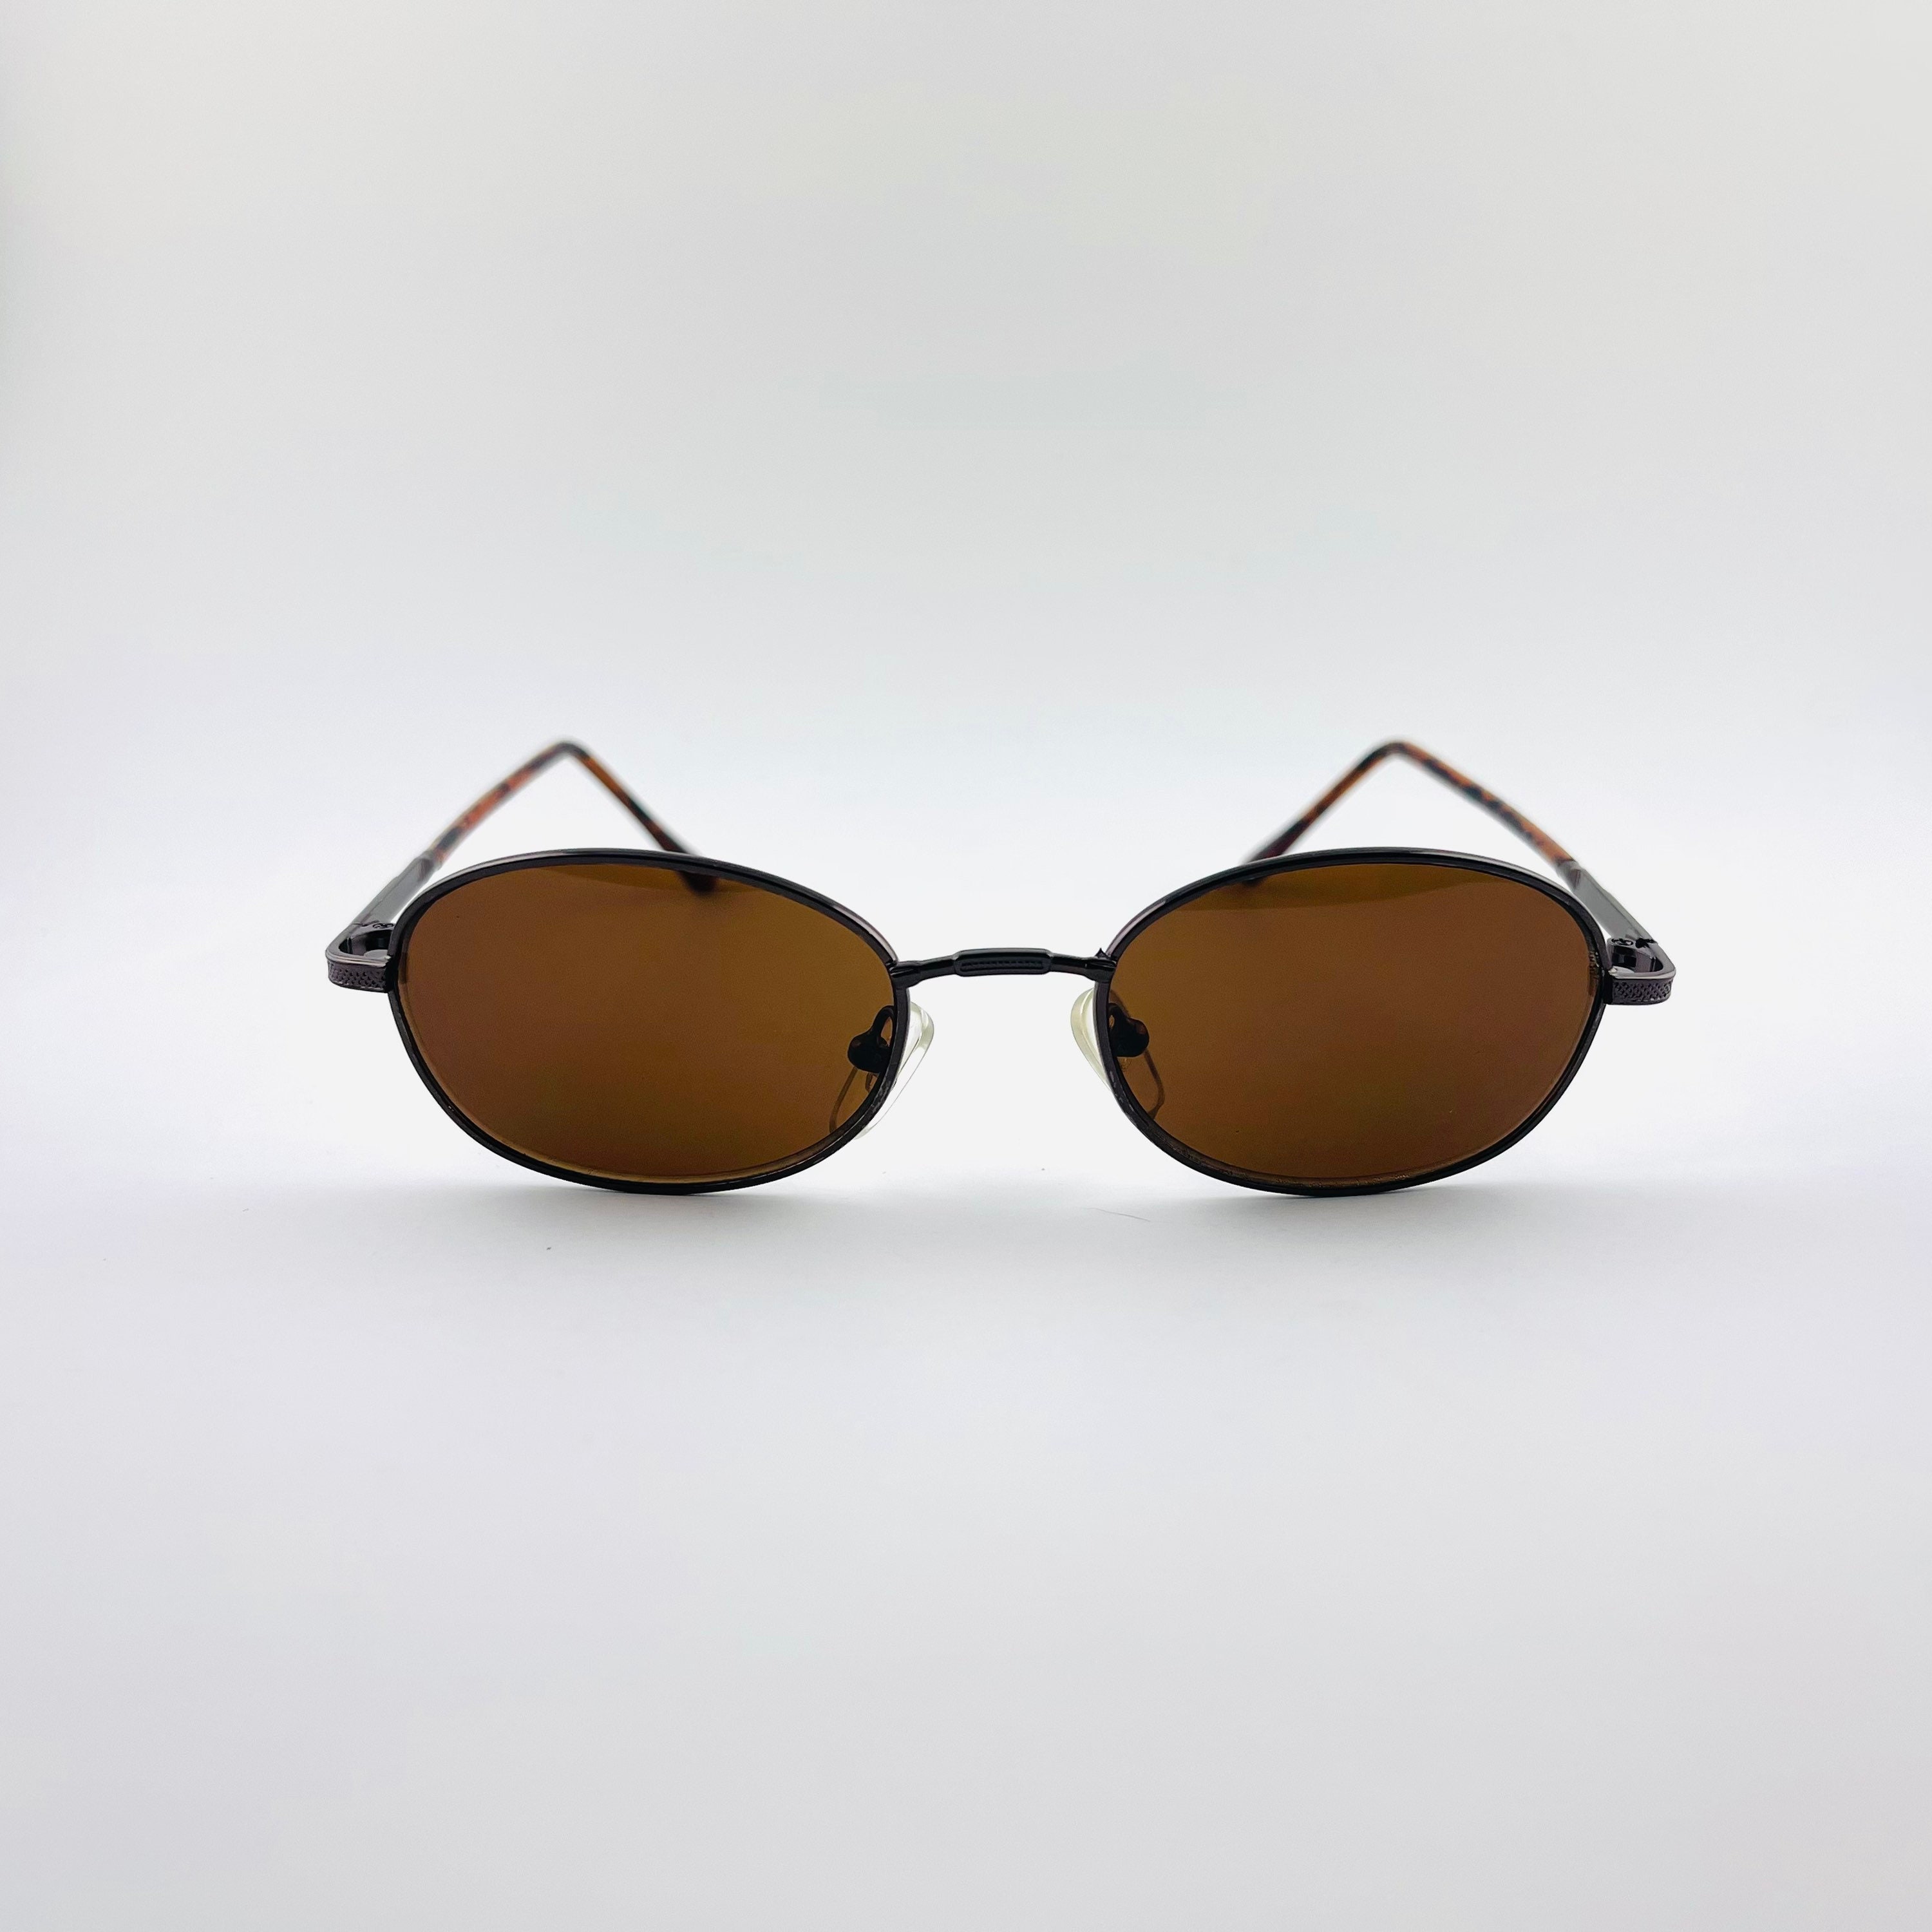 Authentic Vintage Mini Bronze Metal Frame Oval Sunglasses With - Etsy